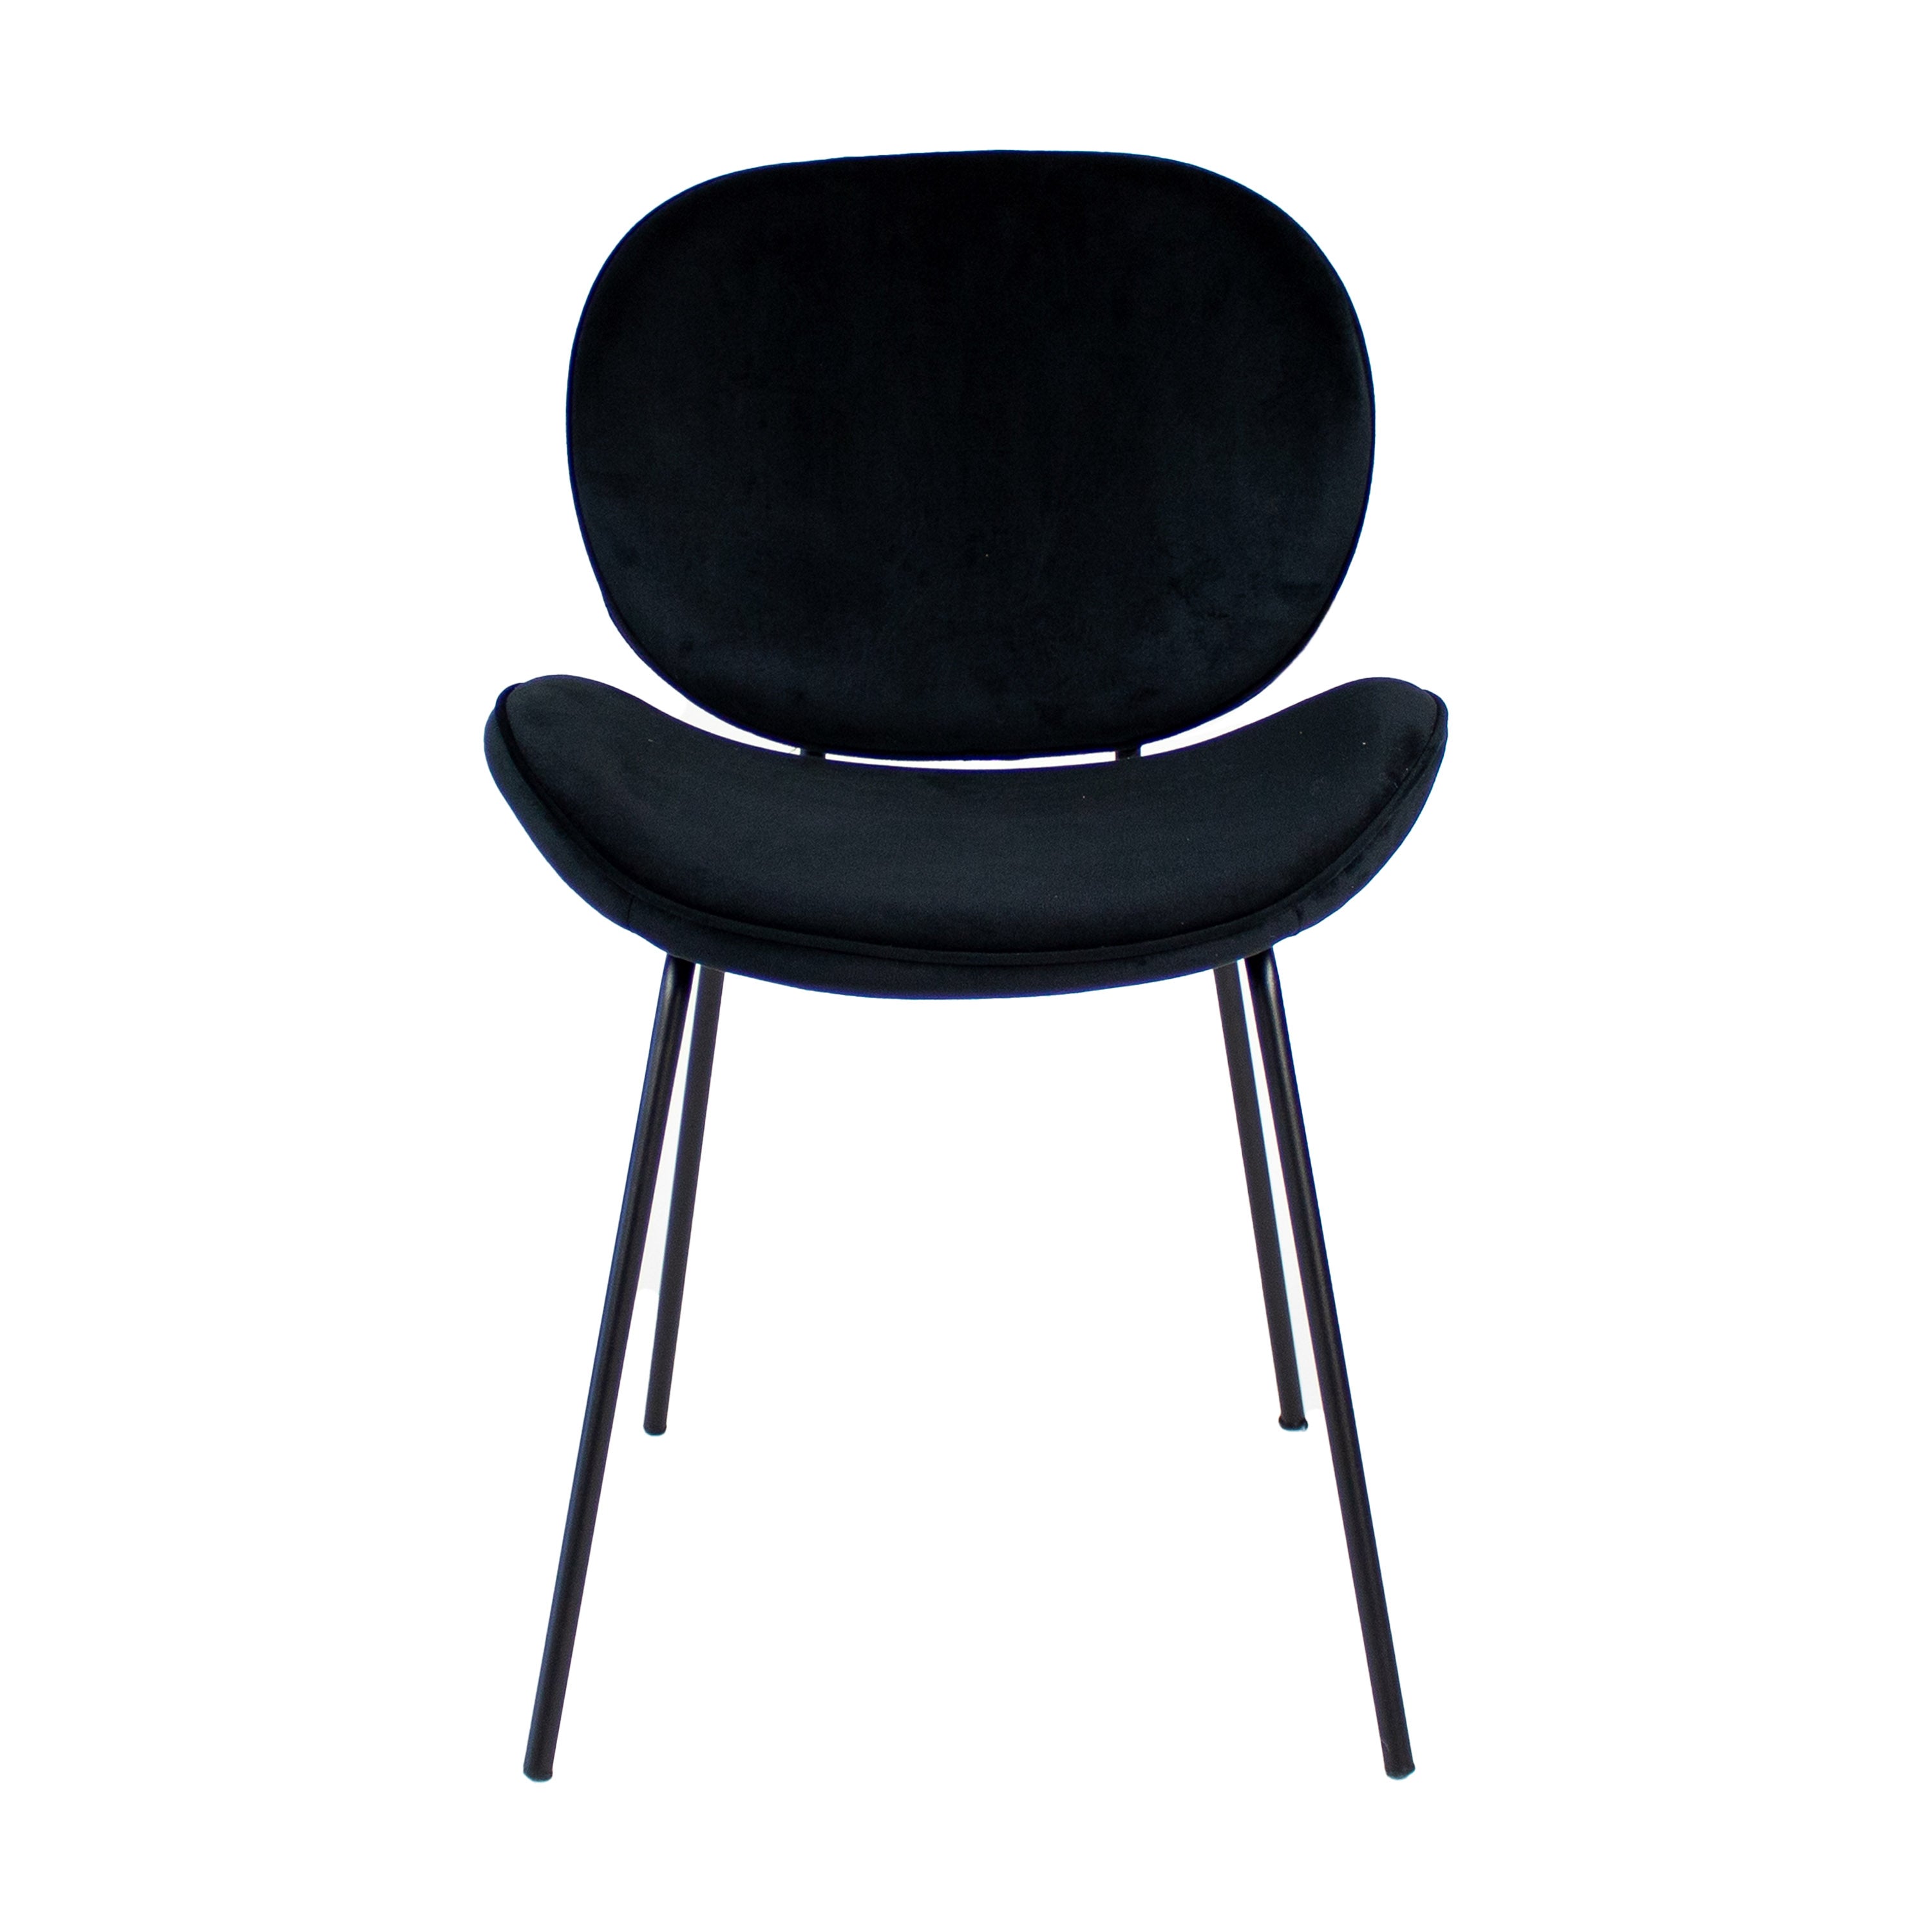 Kick dining room chair Forly